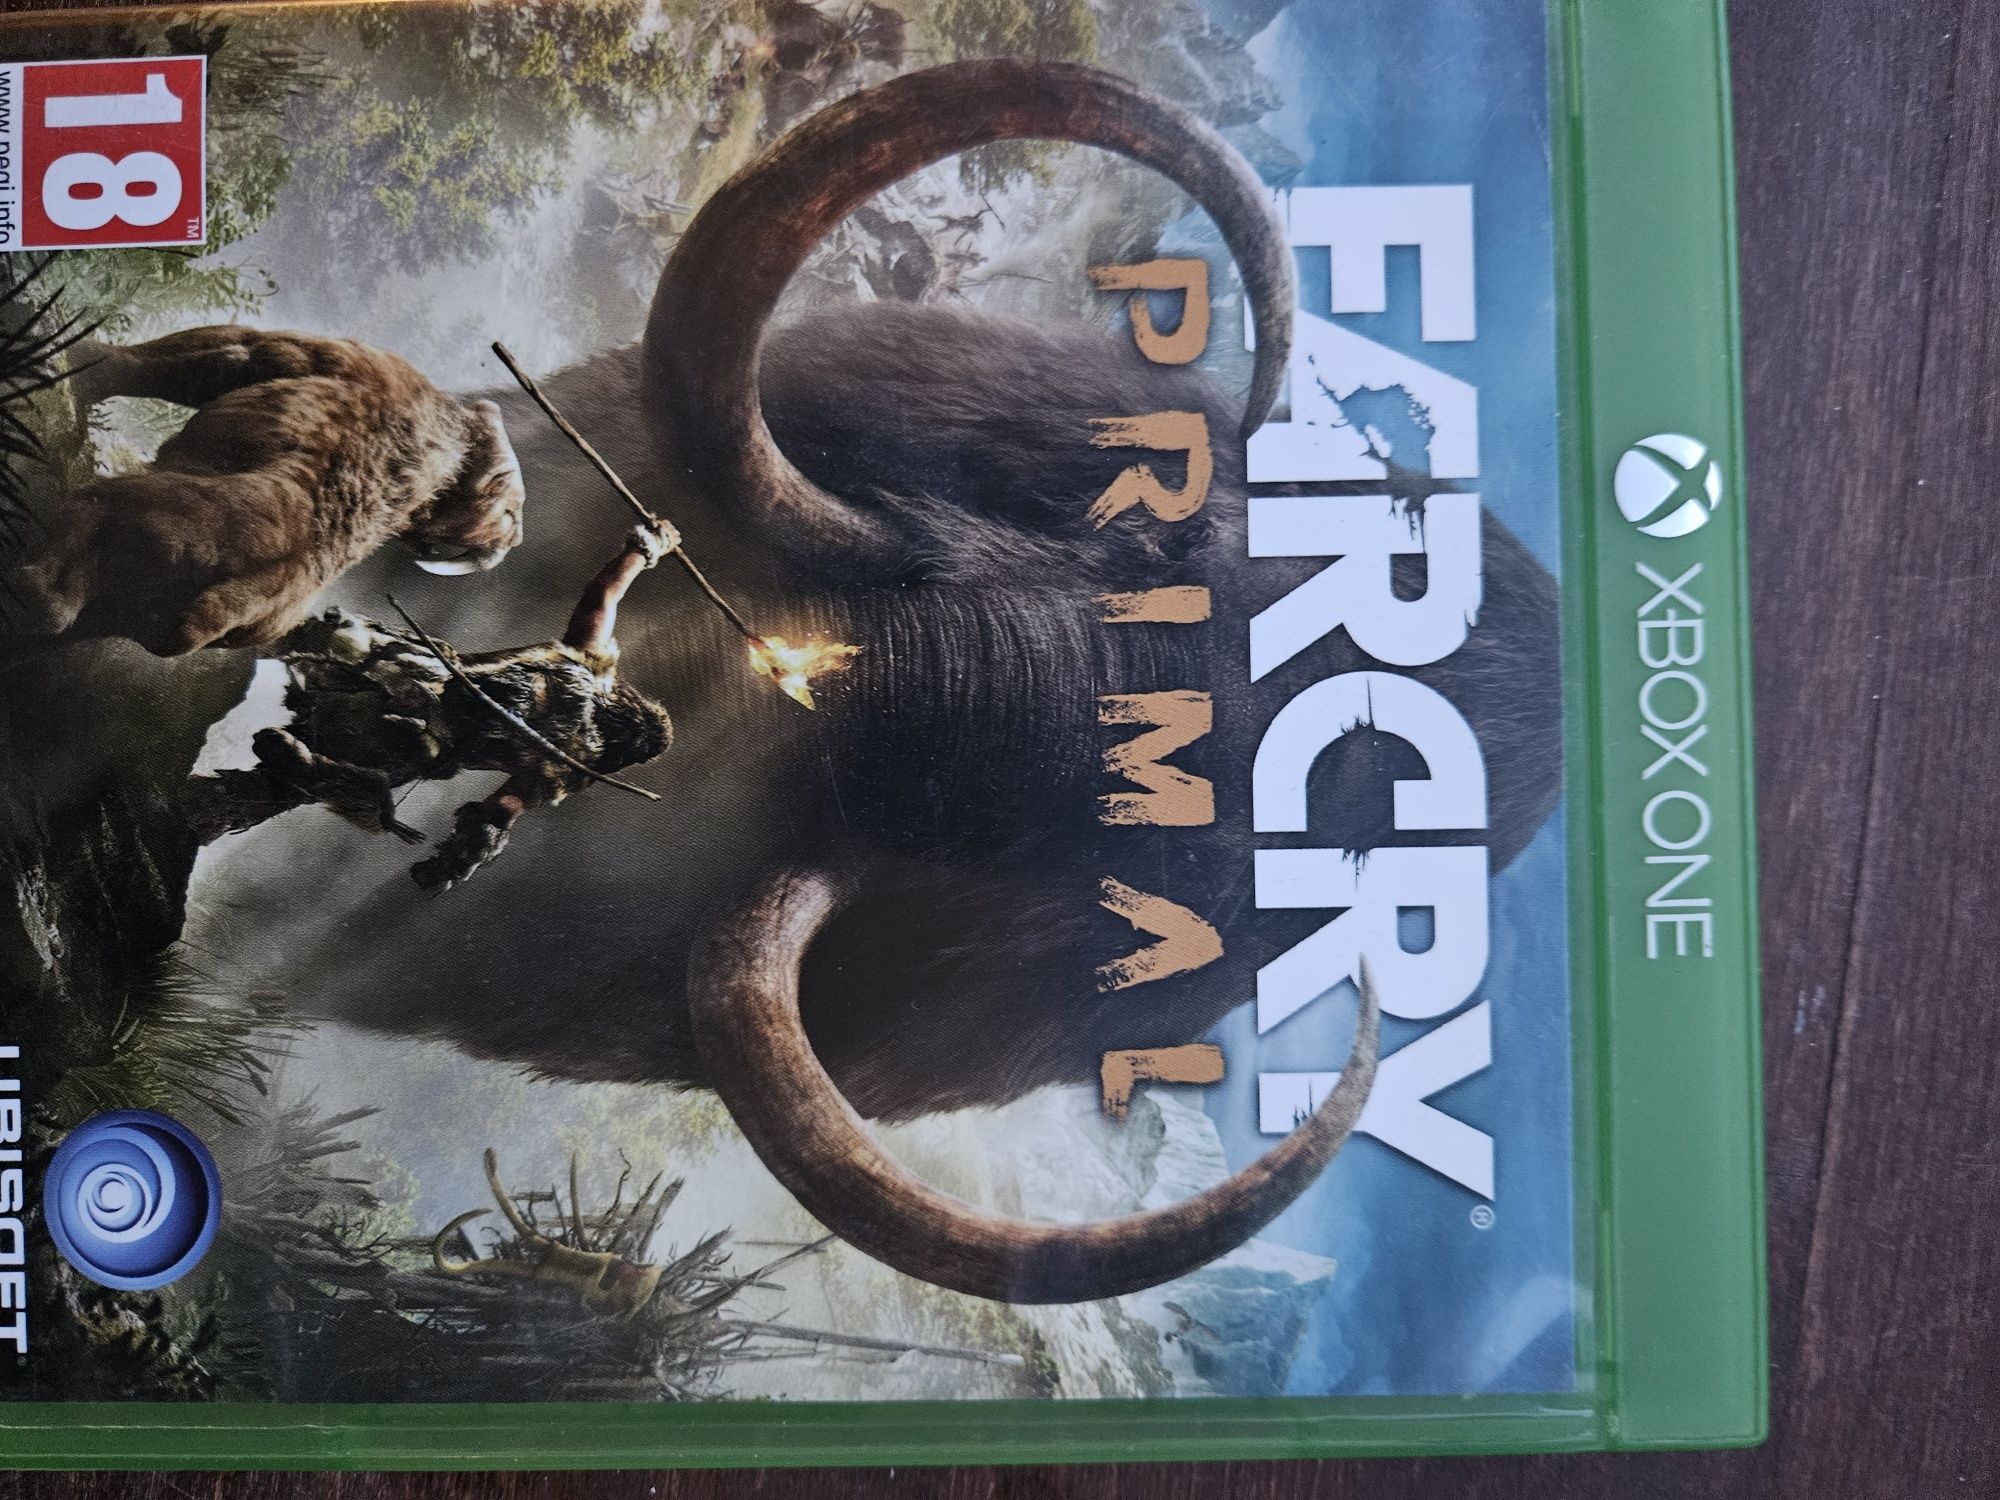 Farcry Primal na Xbox One